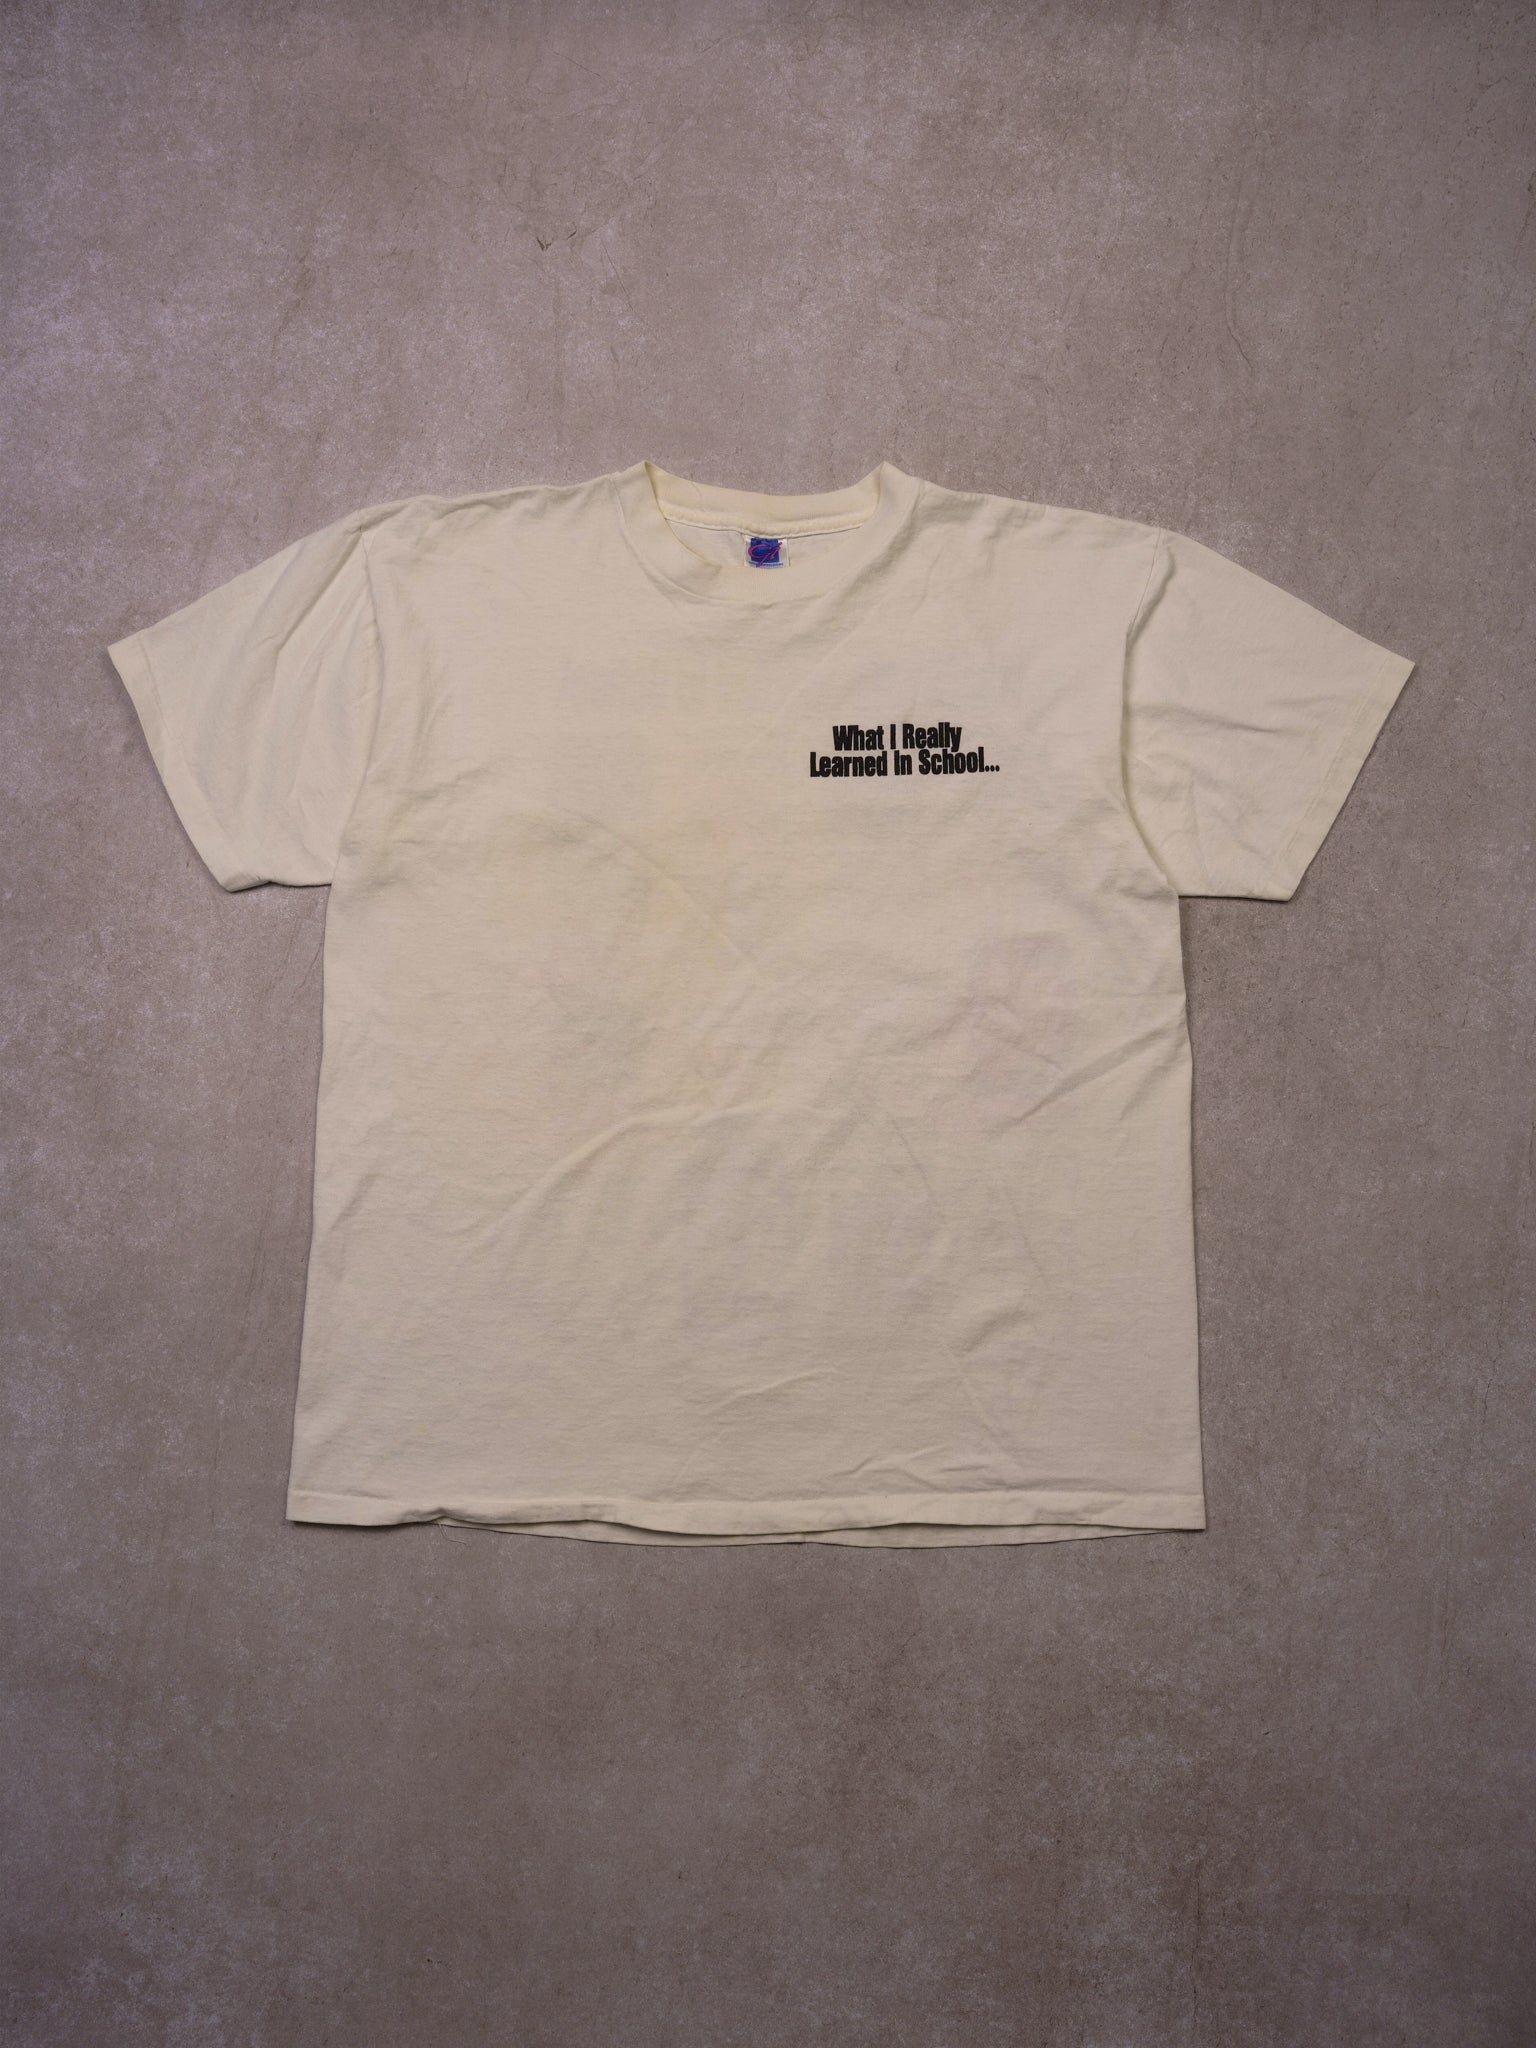 Vintage 90s "White What I Really Learned In School" Beer Tee (M/L)